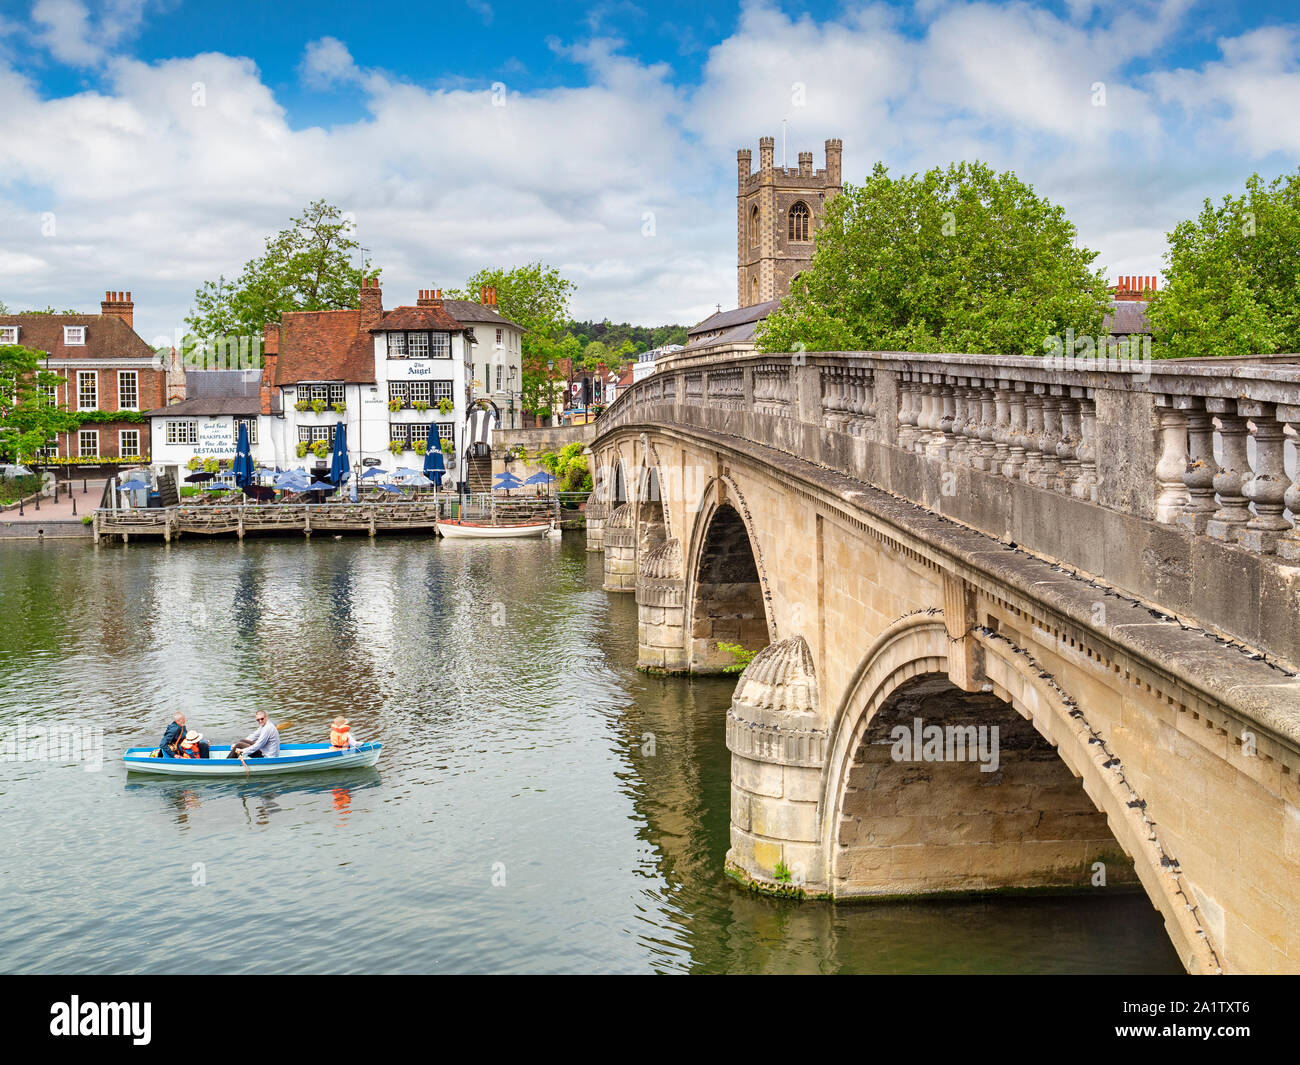 4 June 2019: Henley on Thames, UK - Henley Bridge and the River Thames, with The Angel riverside pub and restaurant, and family in rowing boat on rive Stock Photo